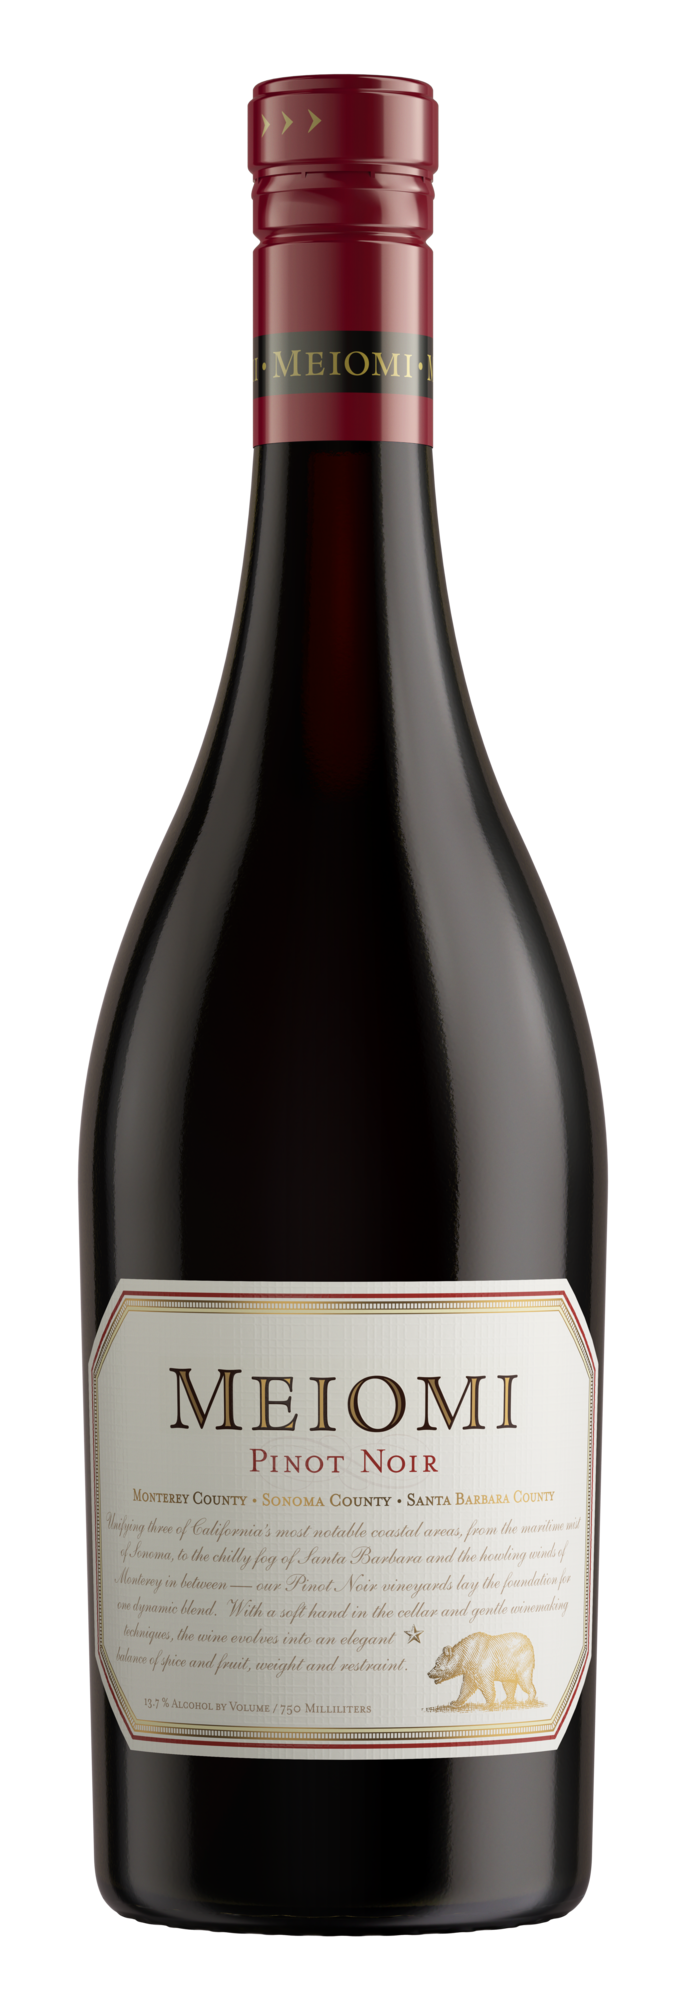  Indulge in  Meiomi’s Pinot Noir  for an intimate dinner for two. Perfectly paired with grilled meat or pasta dishes, the flavor-forward Pinot Noir offers a rich taste providing complexity and depth to the palate.  A rich garnet color, the wine revea